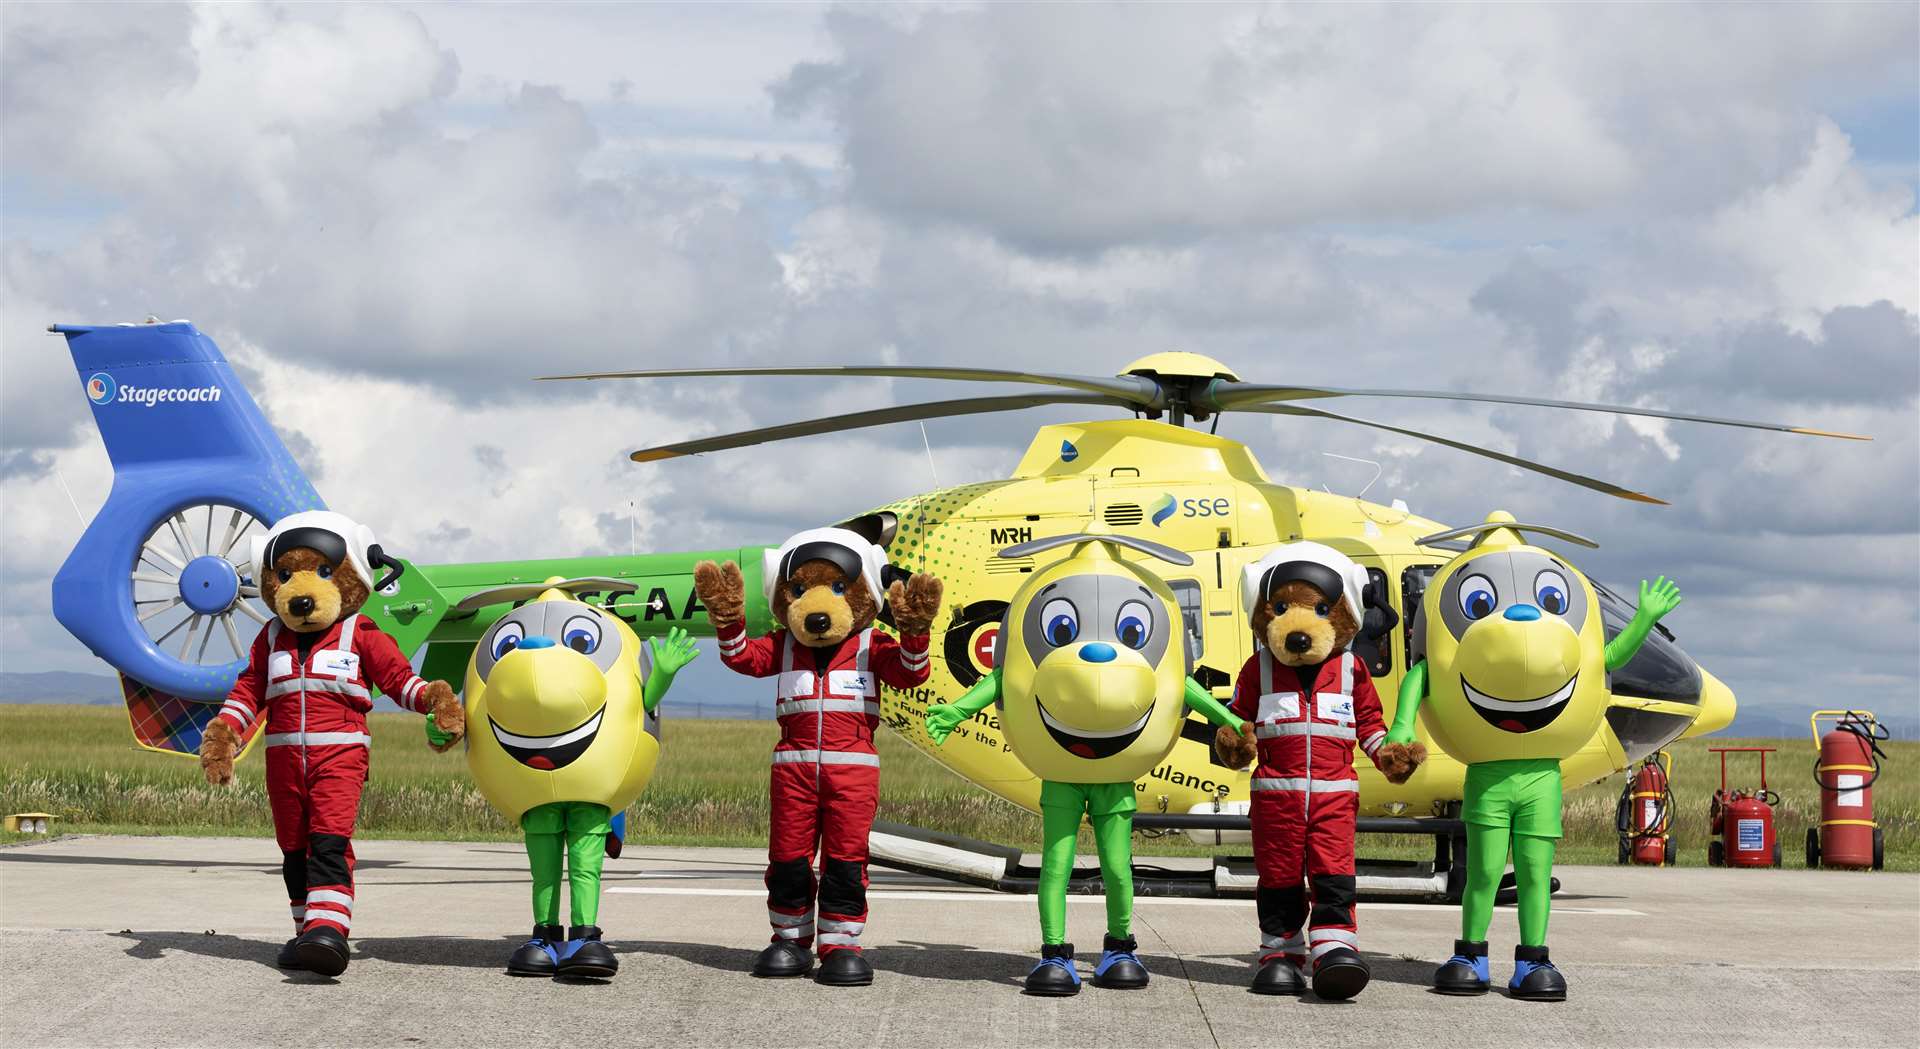 New mascots have joined the Scottish Charity Air Ambulance.